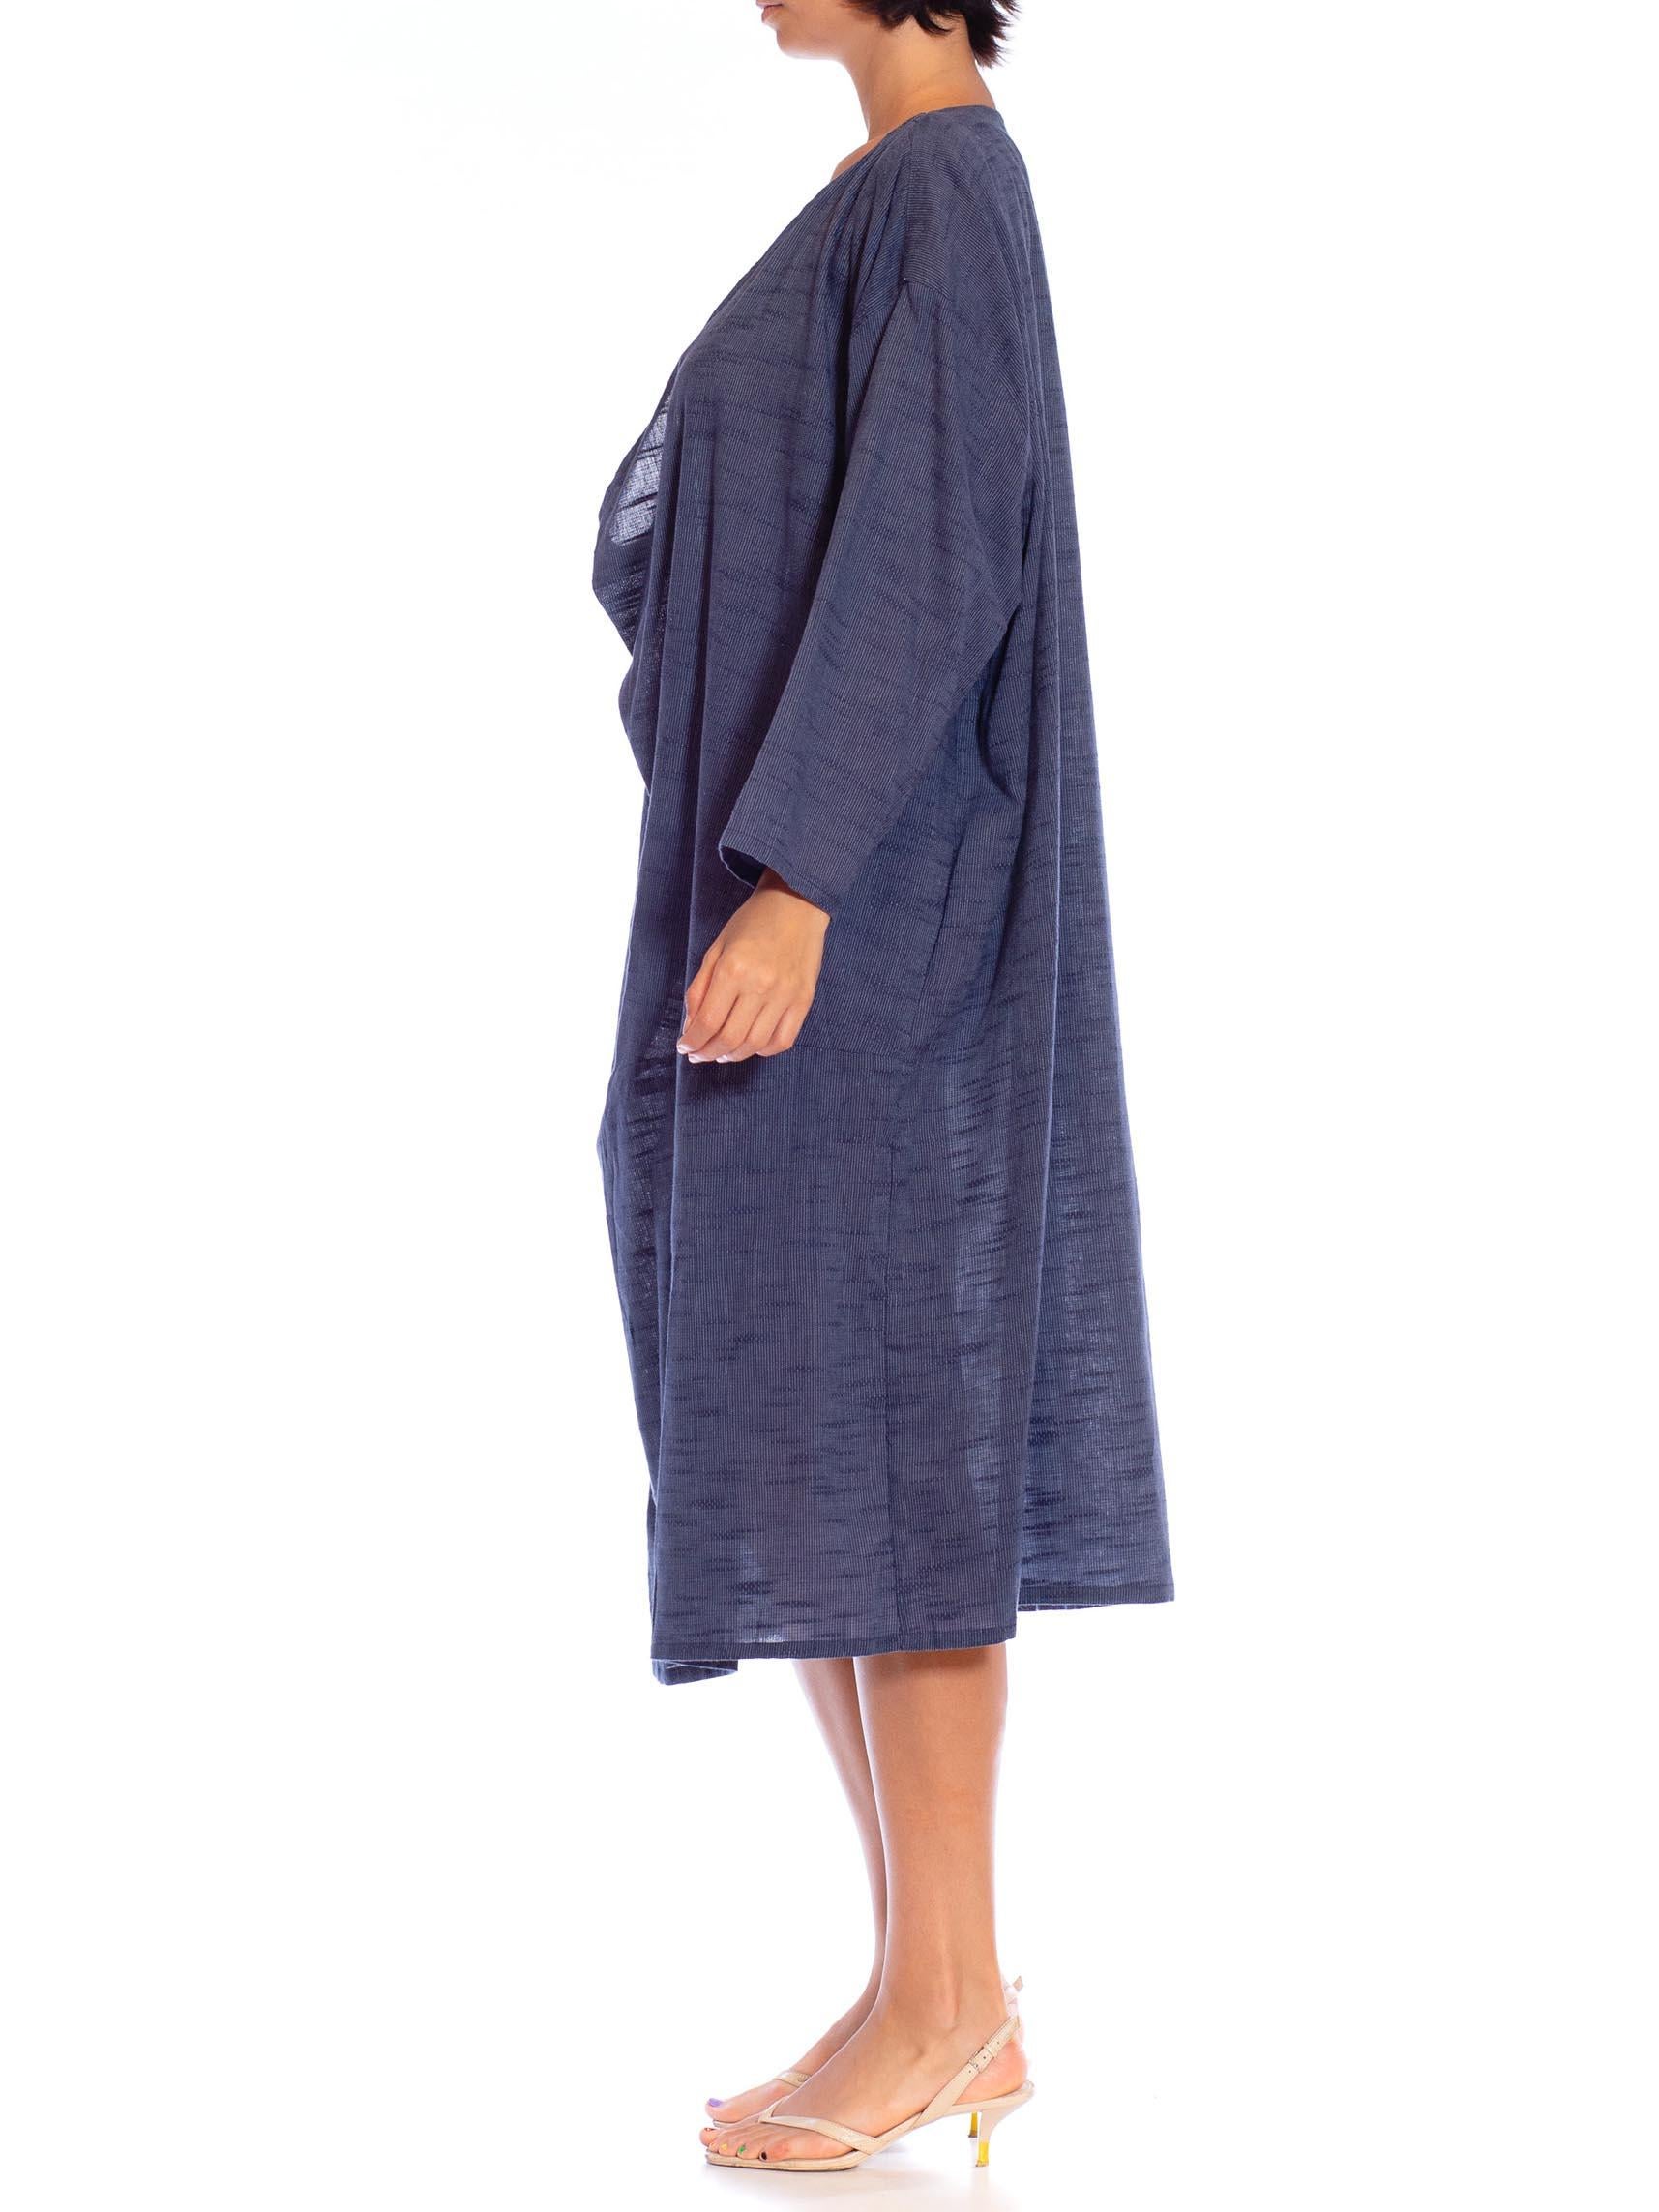 MORPHEW COLLECTION Indigo Blue Cotton Unisex Cowl Neck Tunic Kaftan
MORPHEW COLLECTION is made entirely by hand in our NYC Ateliér of rare antique materials sourced from around the globe. Our sustainable vintage materials represent over a century of